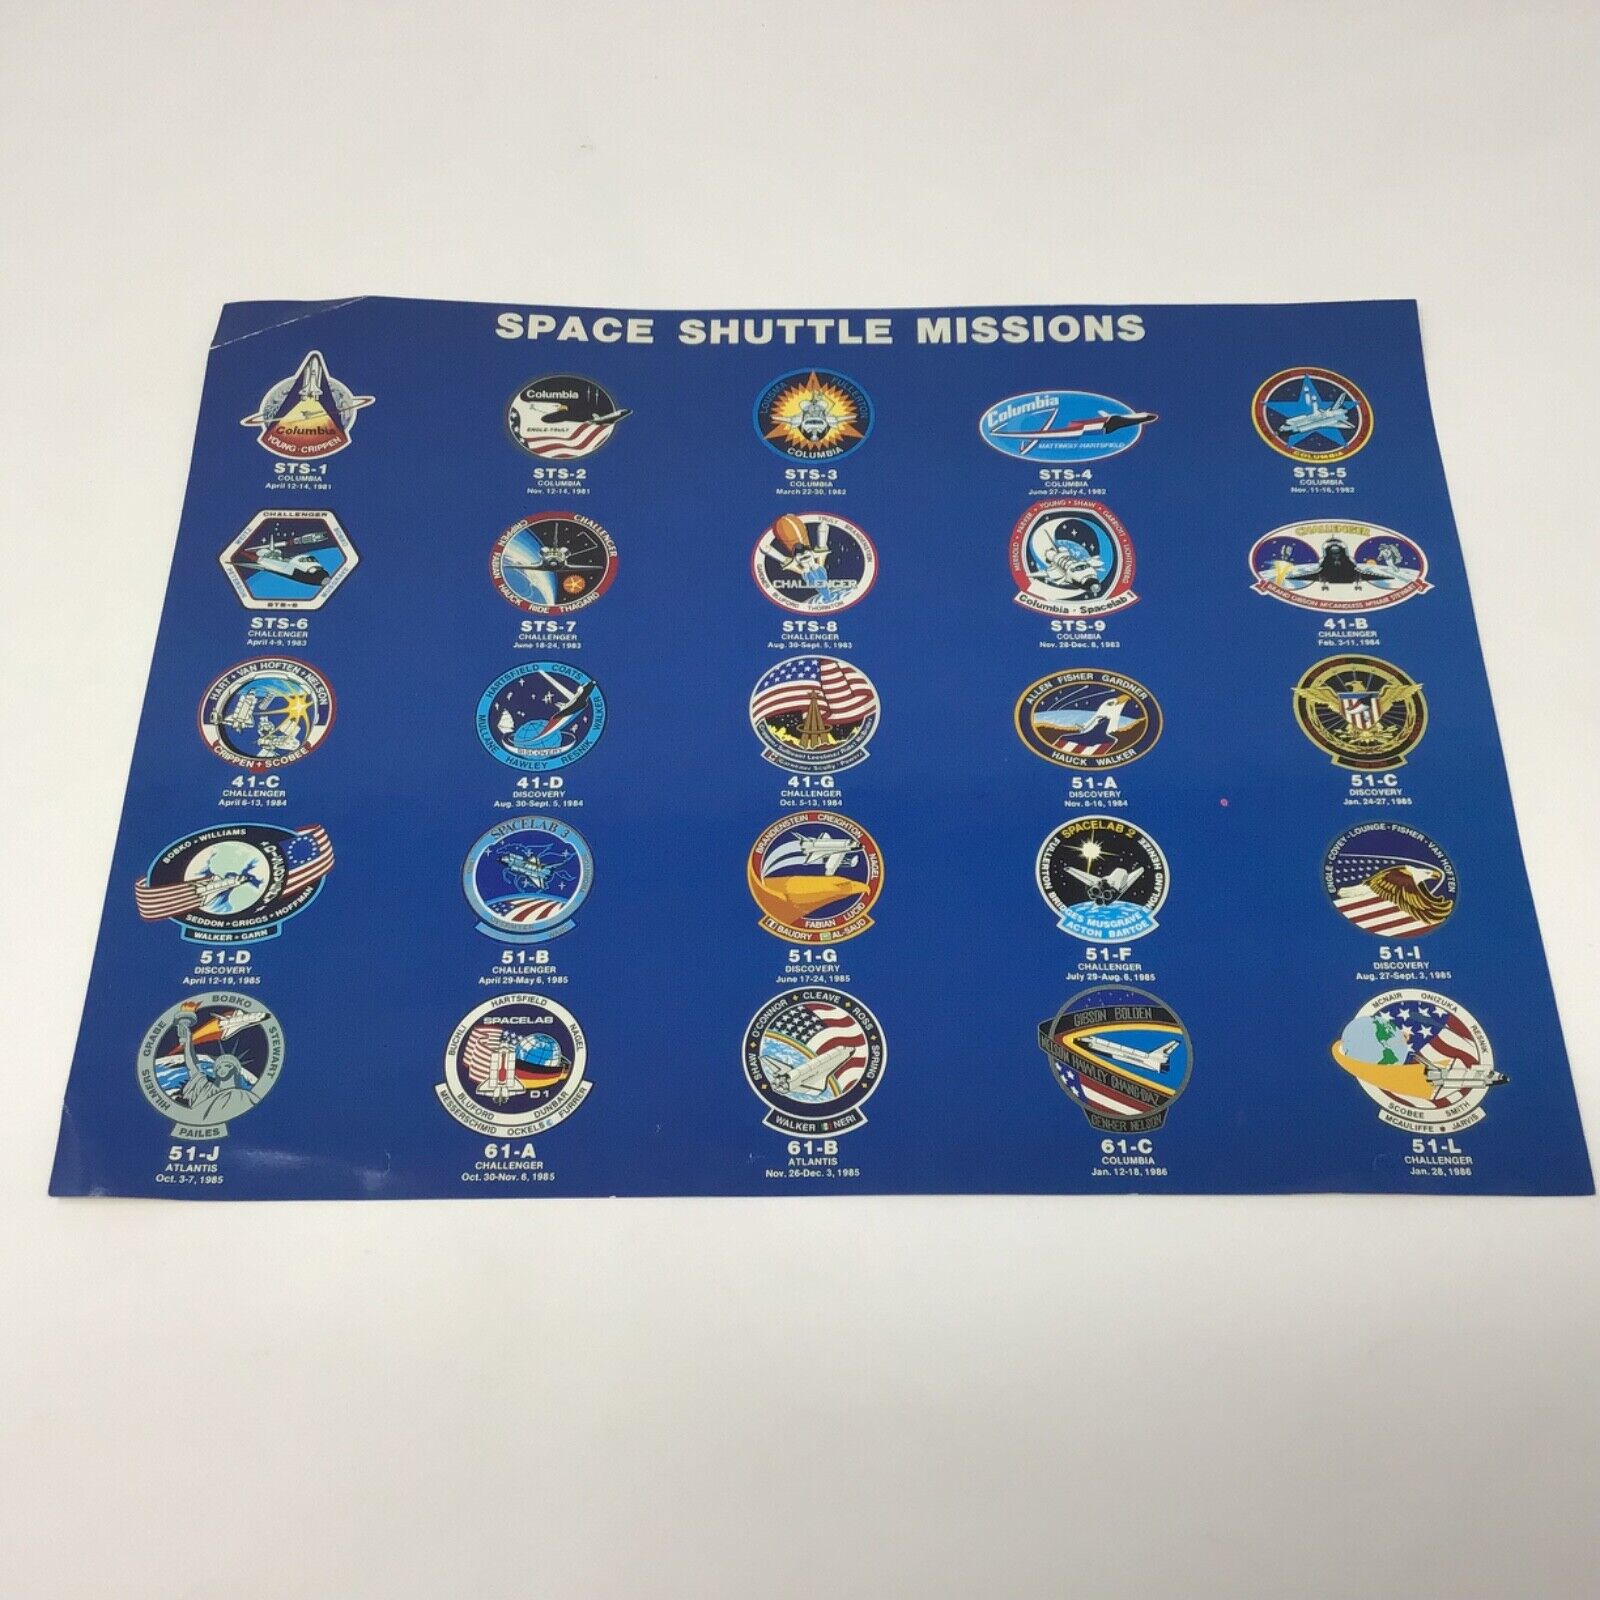 Vintage NASA Space Shuttle Missions 1981 -1986 Emblems and Mission Facts summary